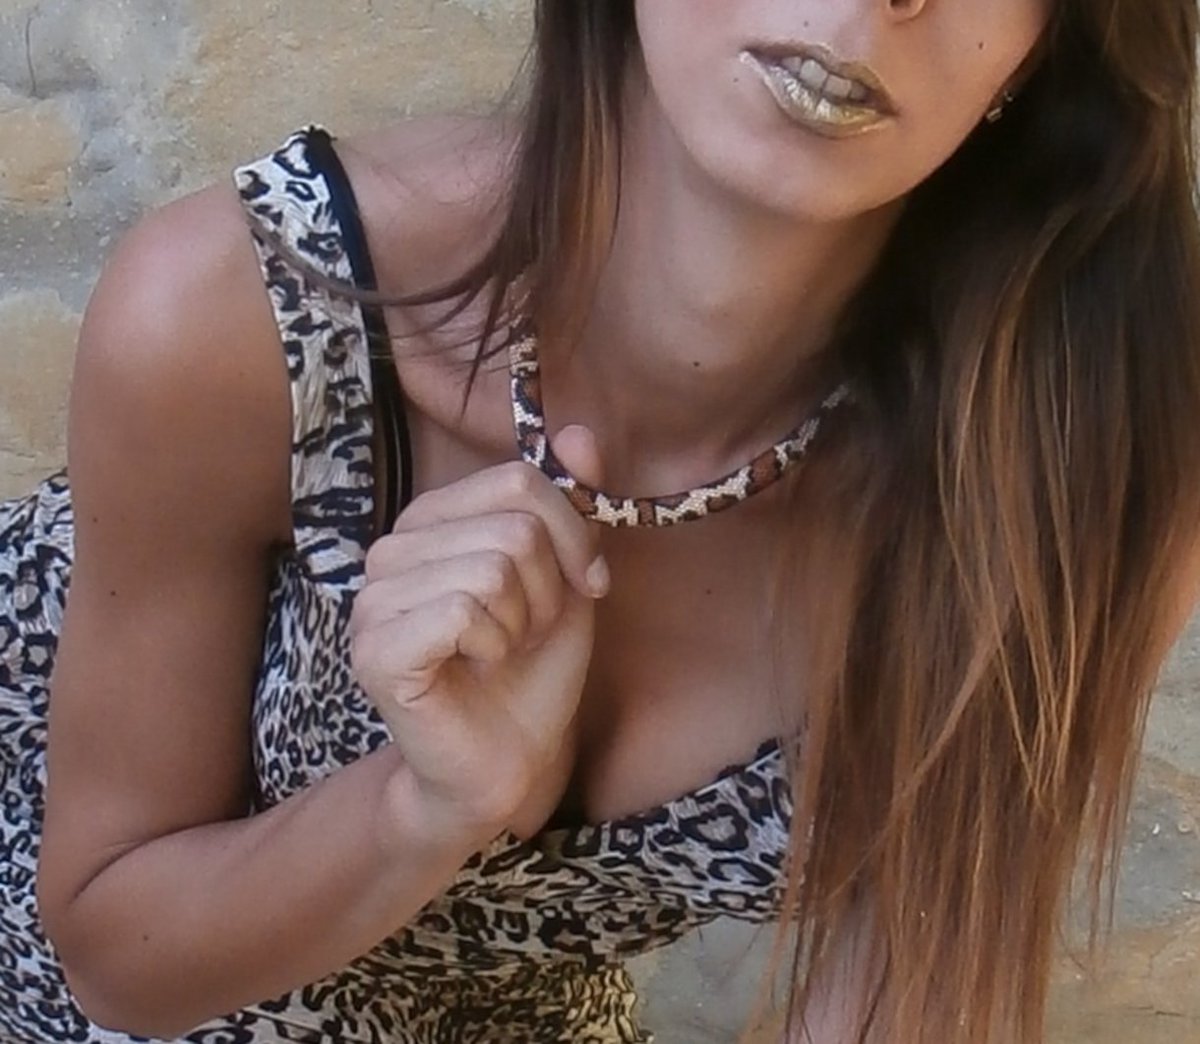 etsy.com/listing/280478… Woman imitation cheetah leather necklace made with glass beads Collar for girl Modern Contemporary jewel with magnetic closure #MadeinItaly #jewelry #handmadejewels #giftsforher #MadeInDreams #etsyshopping #accessories